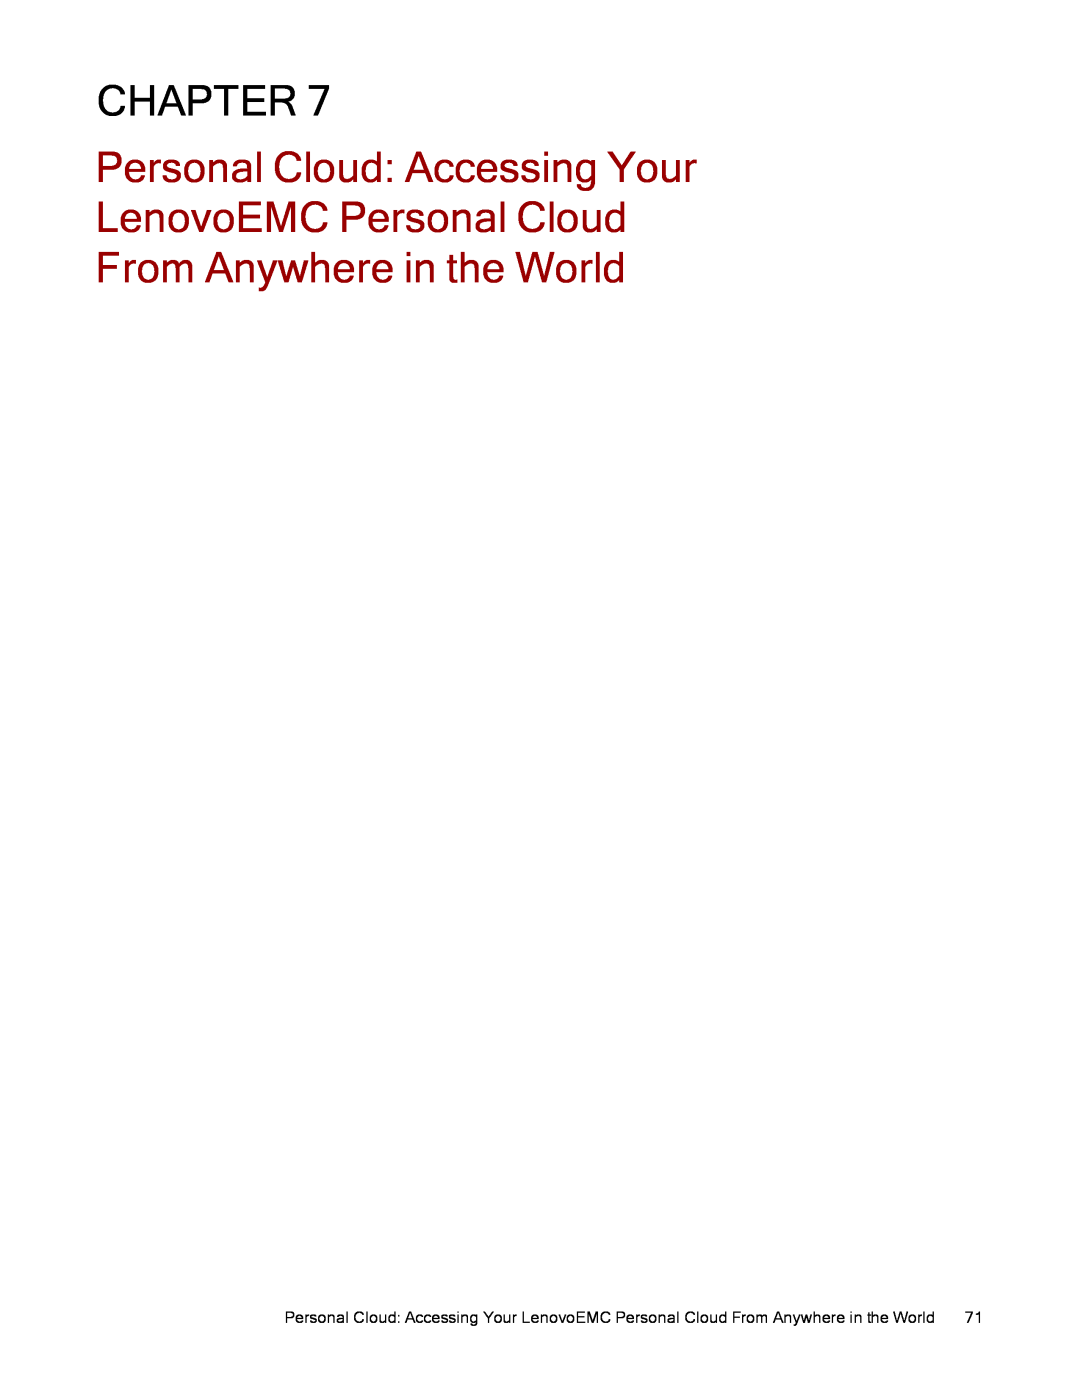 Lenovo 70B89003NA, 70B89001NA Personal Cloud Accessing Your LenovoEMC Personal Cloud, From Anywhere in the World, Chapter 